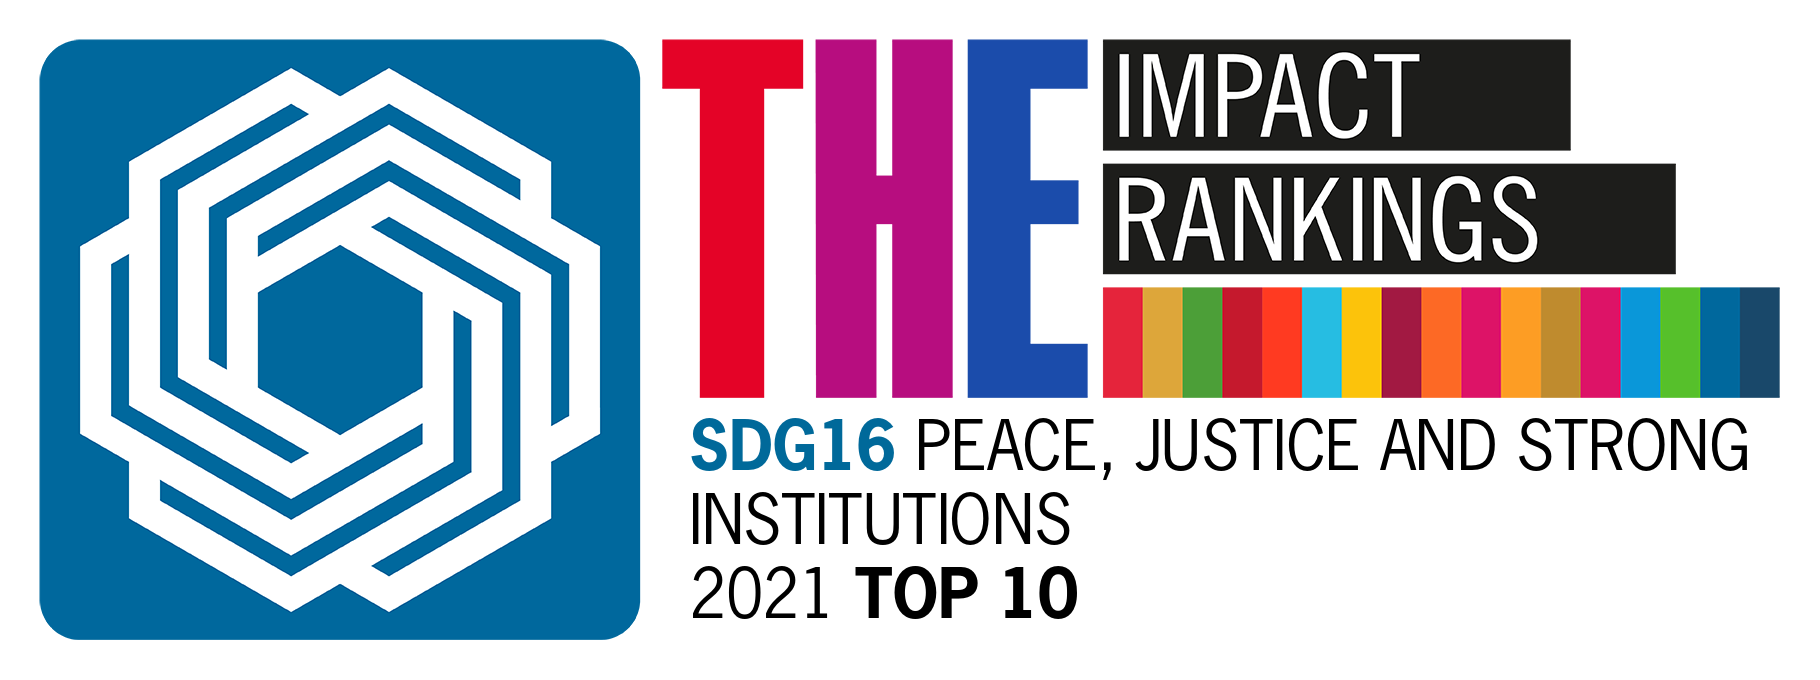 THE impact rankings SDG 16 Peace, Justice & strong institutions 2021 top 10 